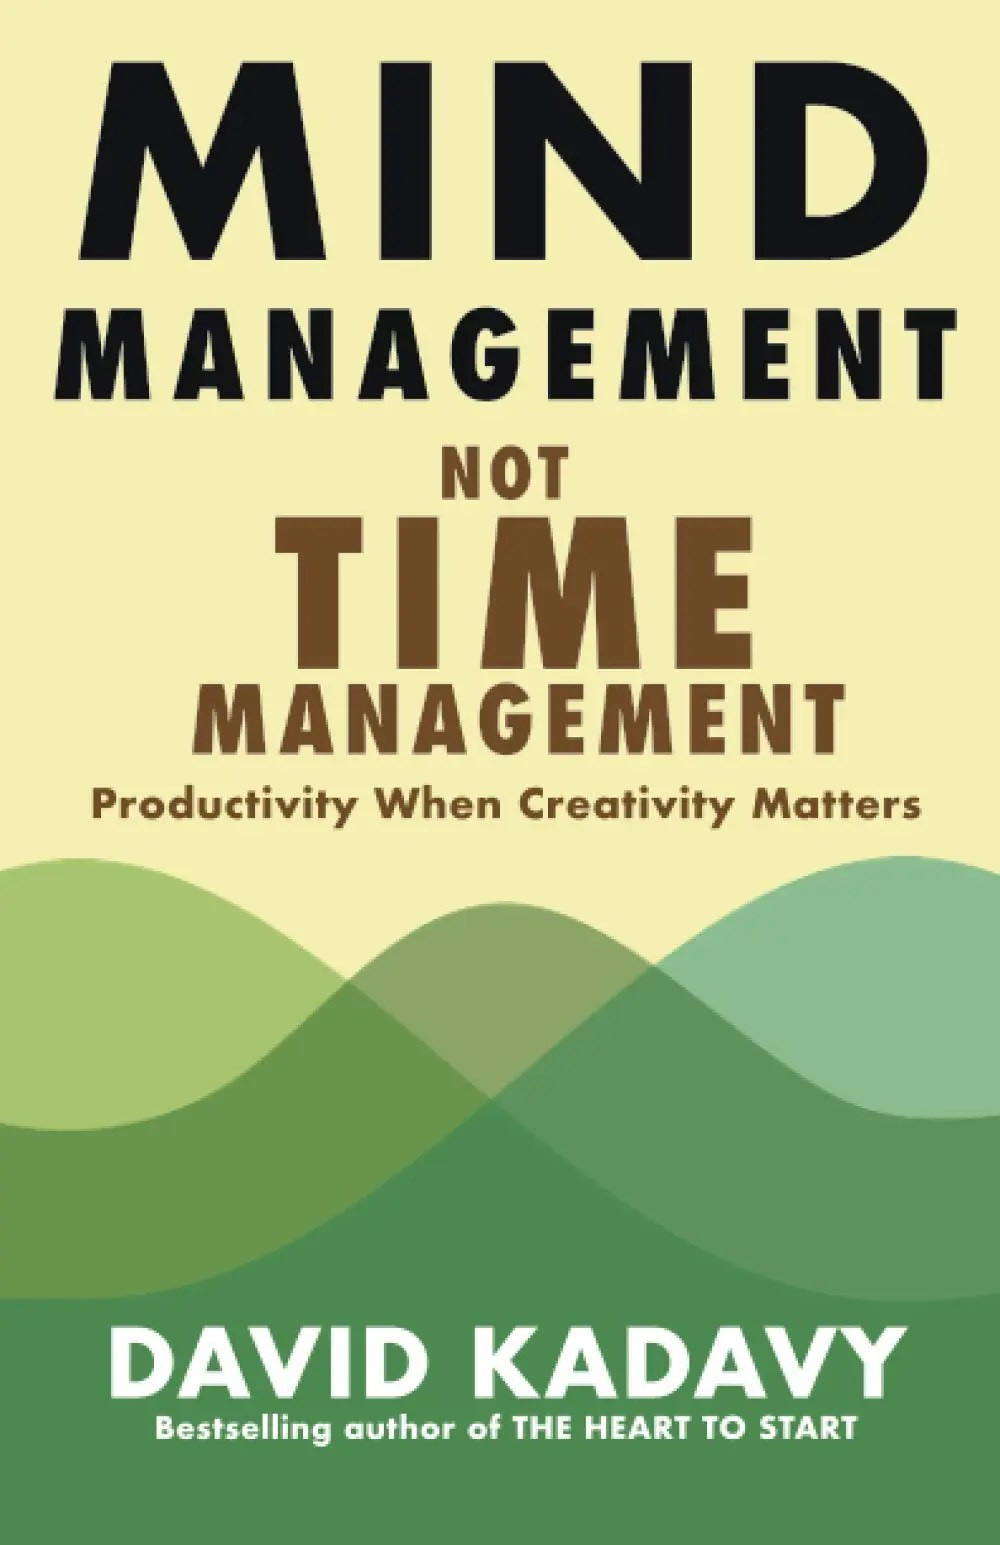 Mind Management, Not Time Management: Book Summary with 4 Key Learnings, Examples, Benefits